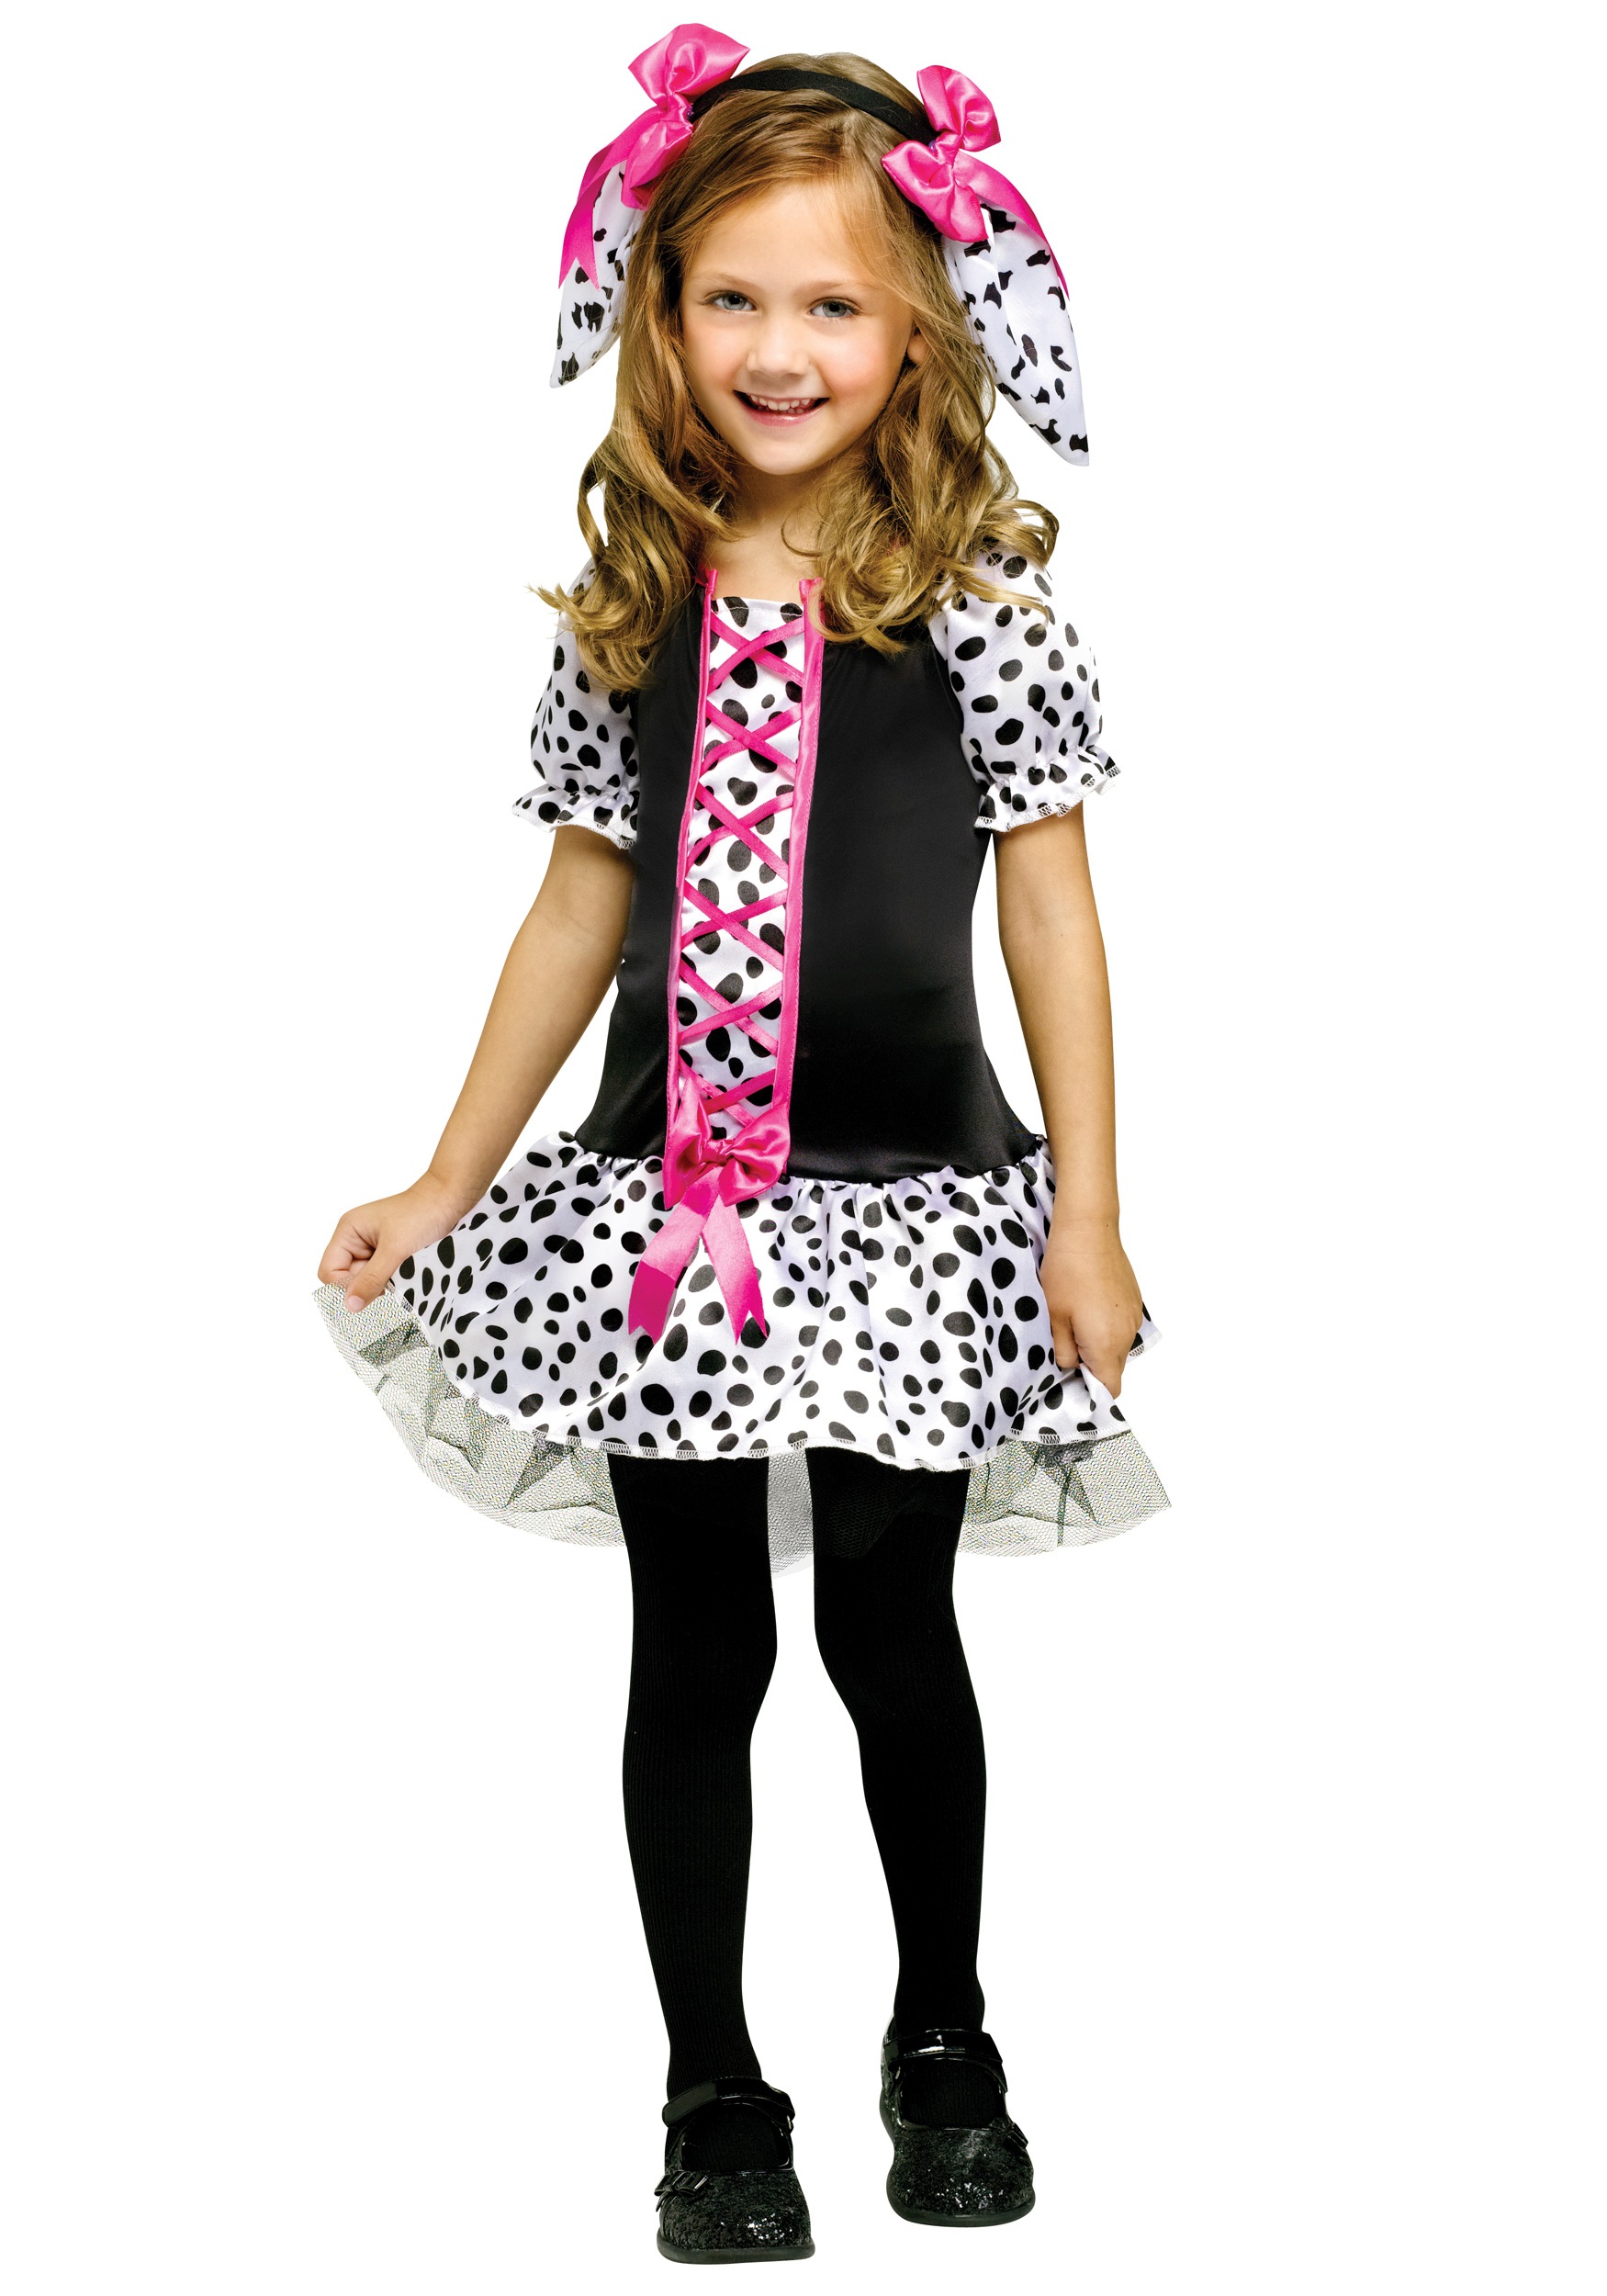 Puppy Dog Costume For Kids Best Kids Costumes